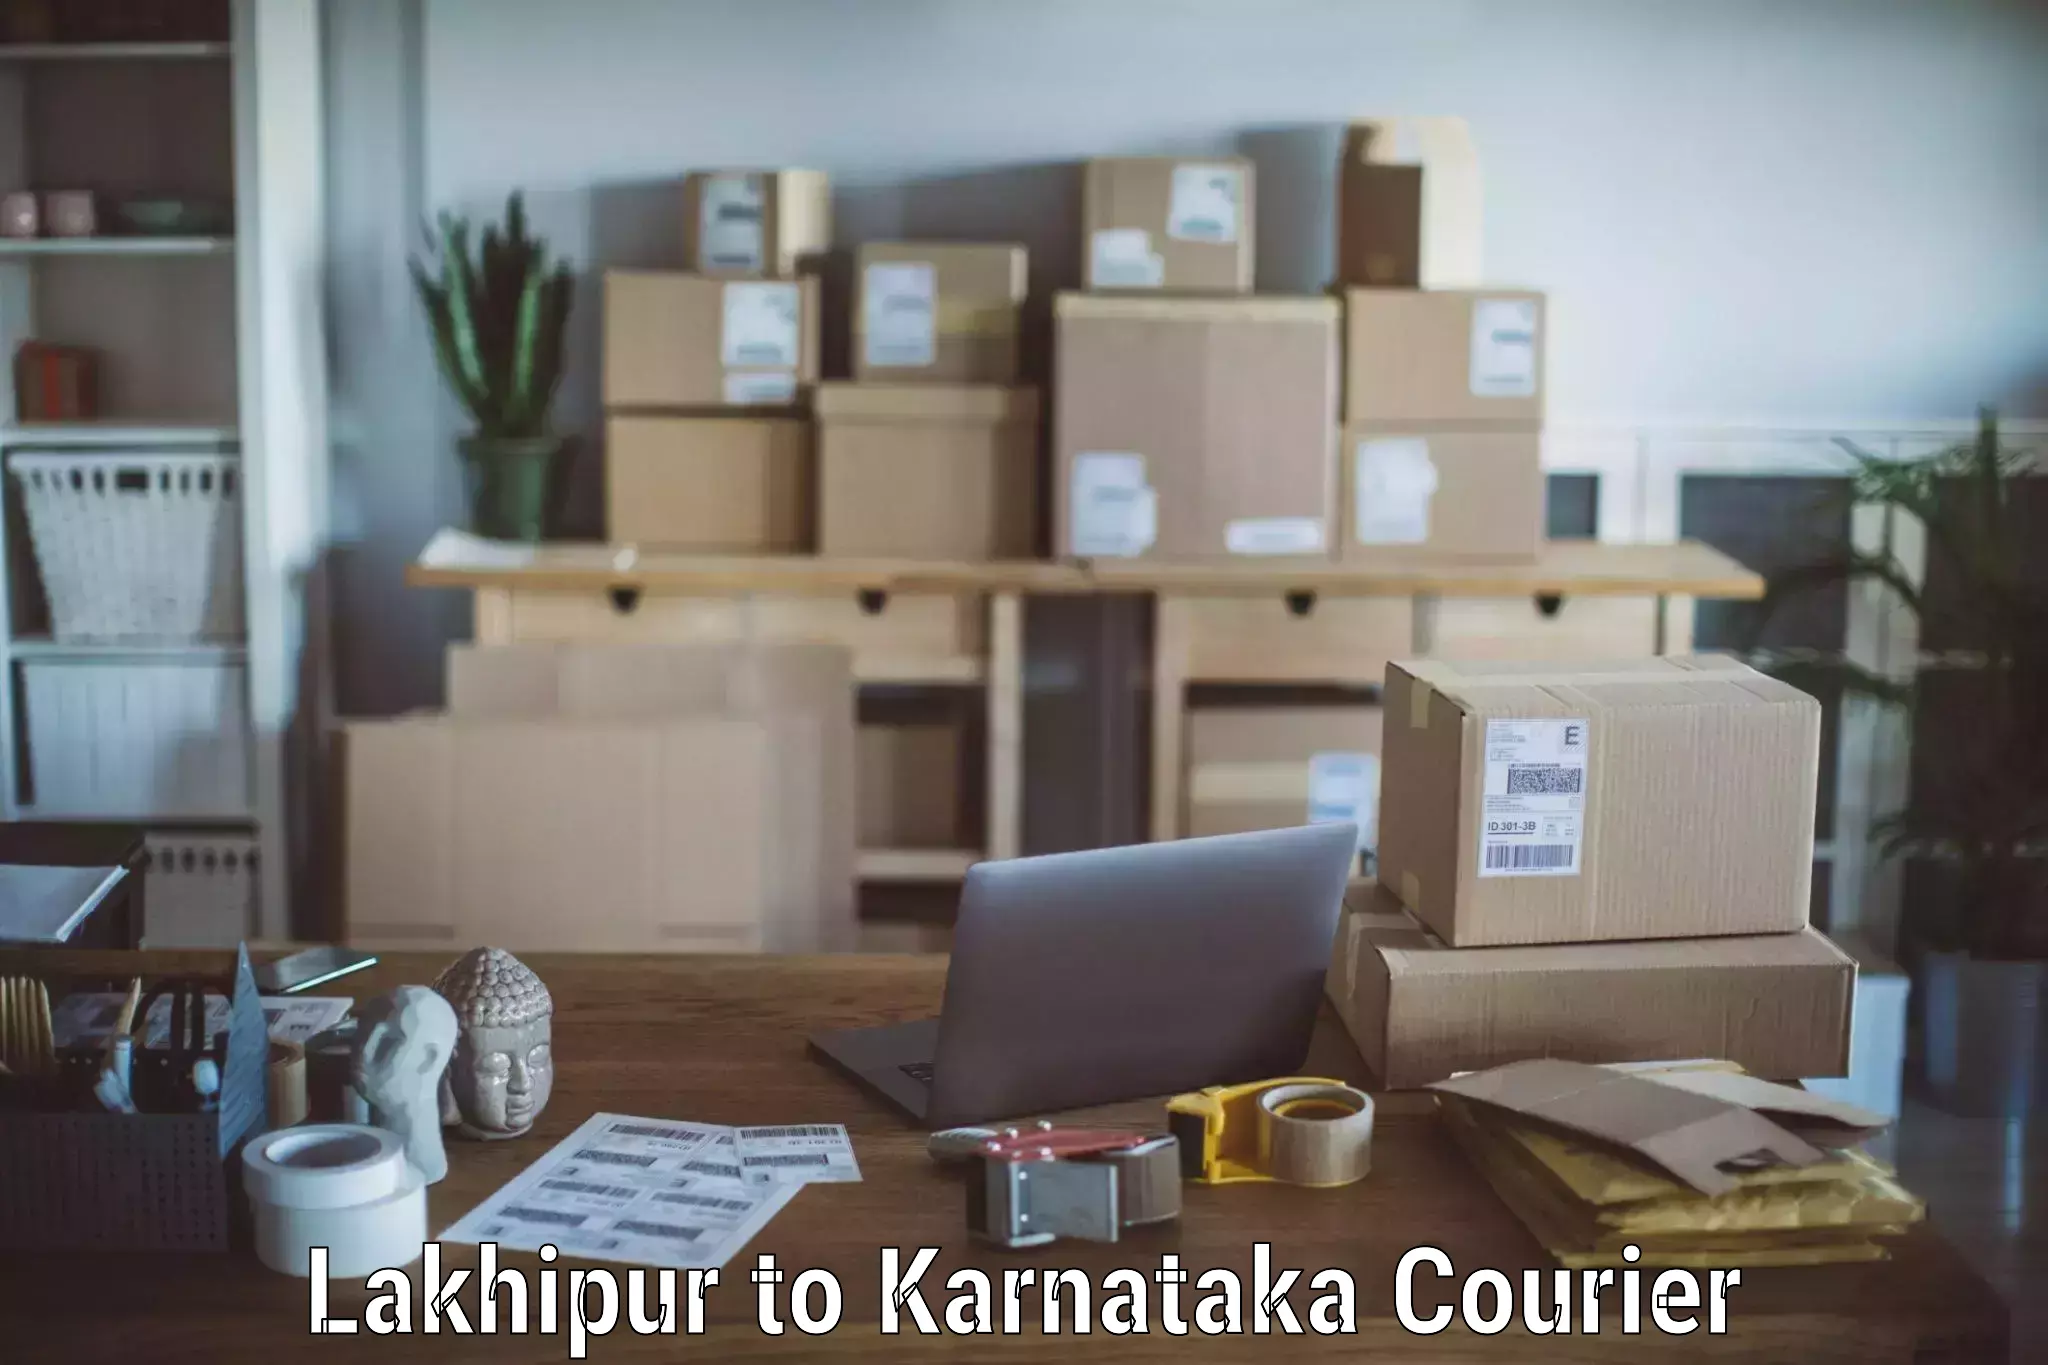 Trusted relocation services Lakhipur to Karnataka